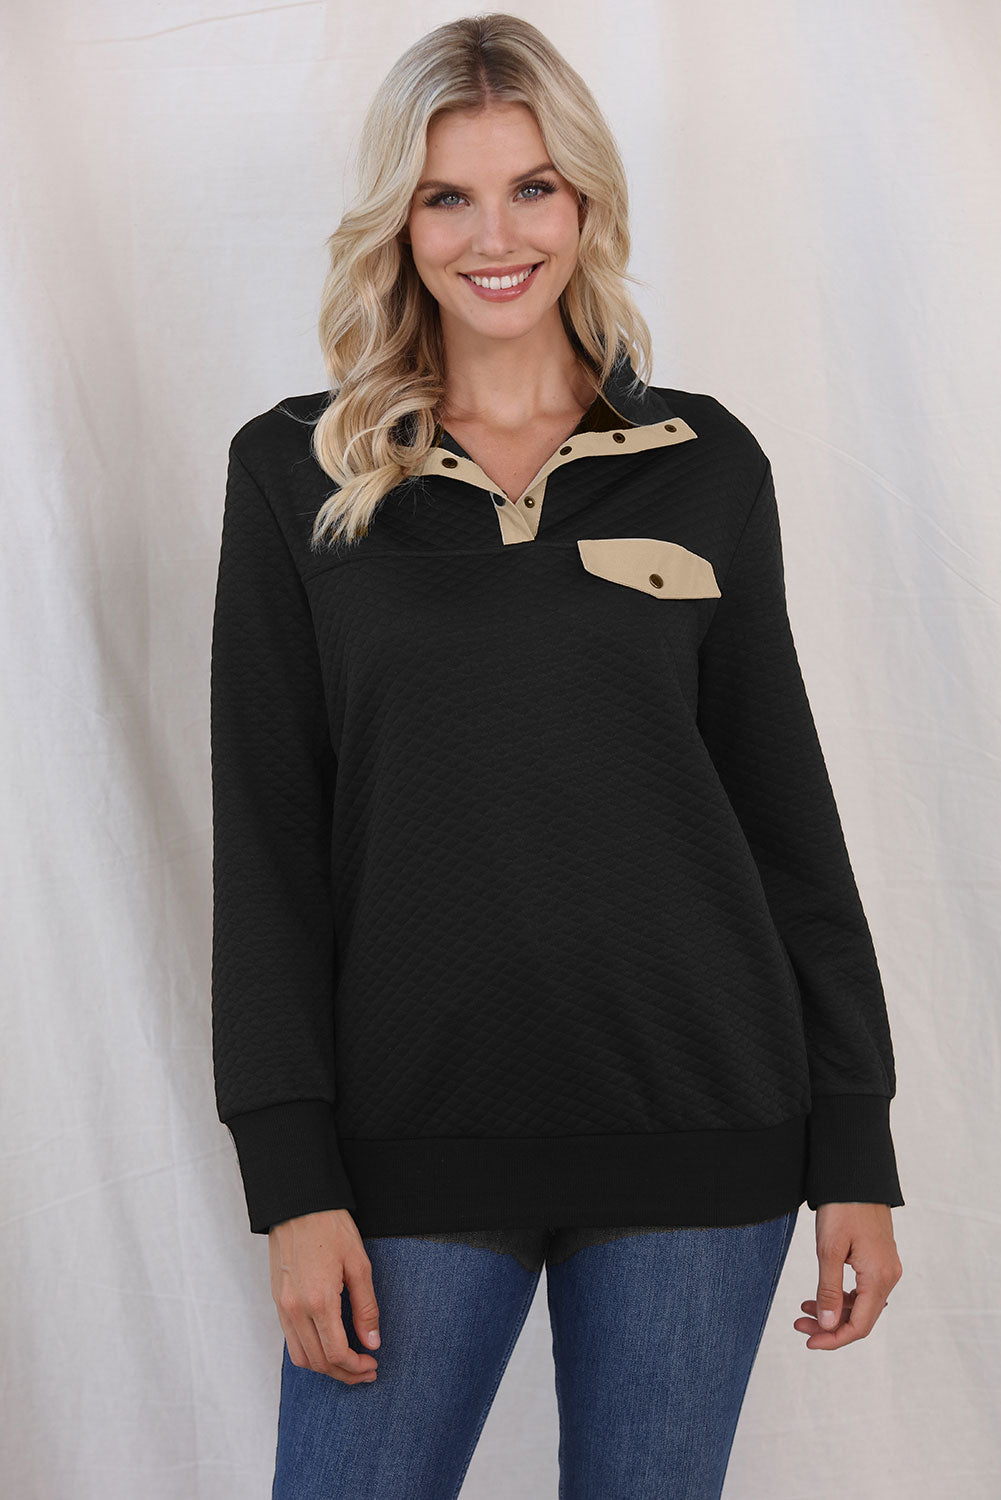 Collared Neck Long Sleeve Top - Black / S - Women’s Clothing & Accessories - Shirts & Tops - 8 - 2024